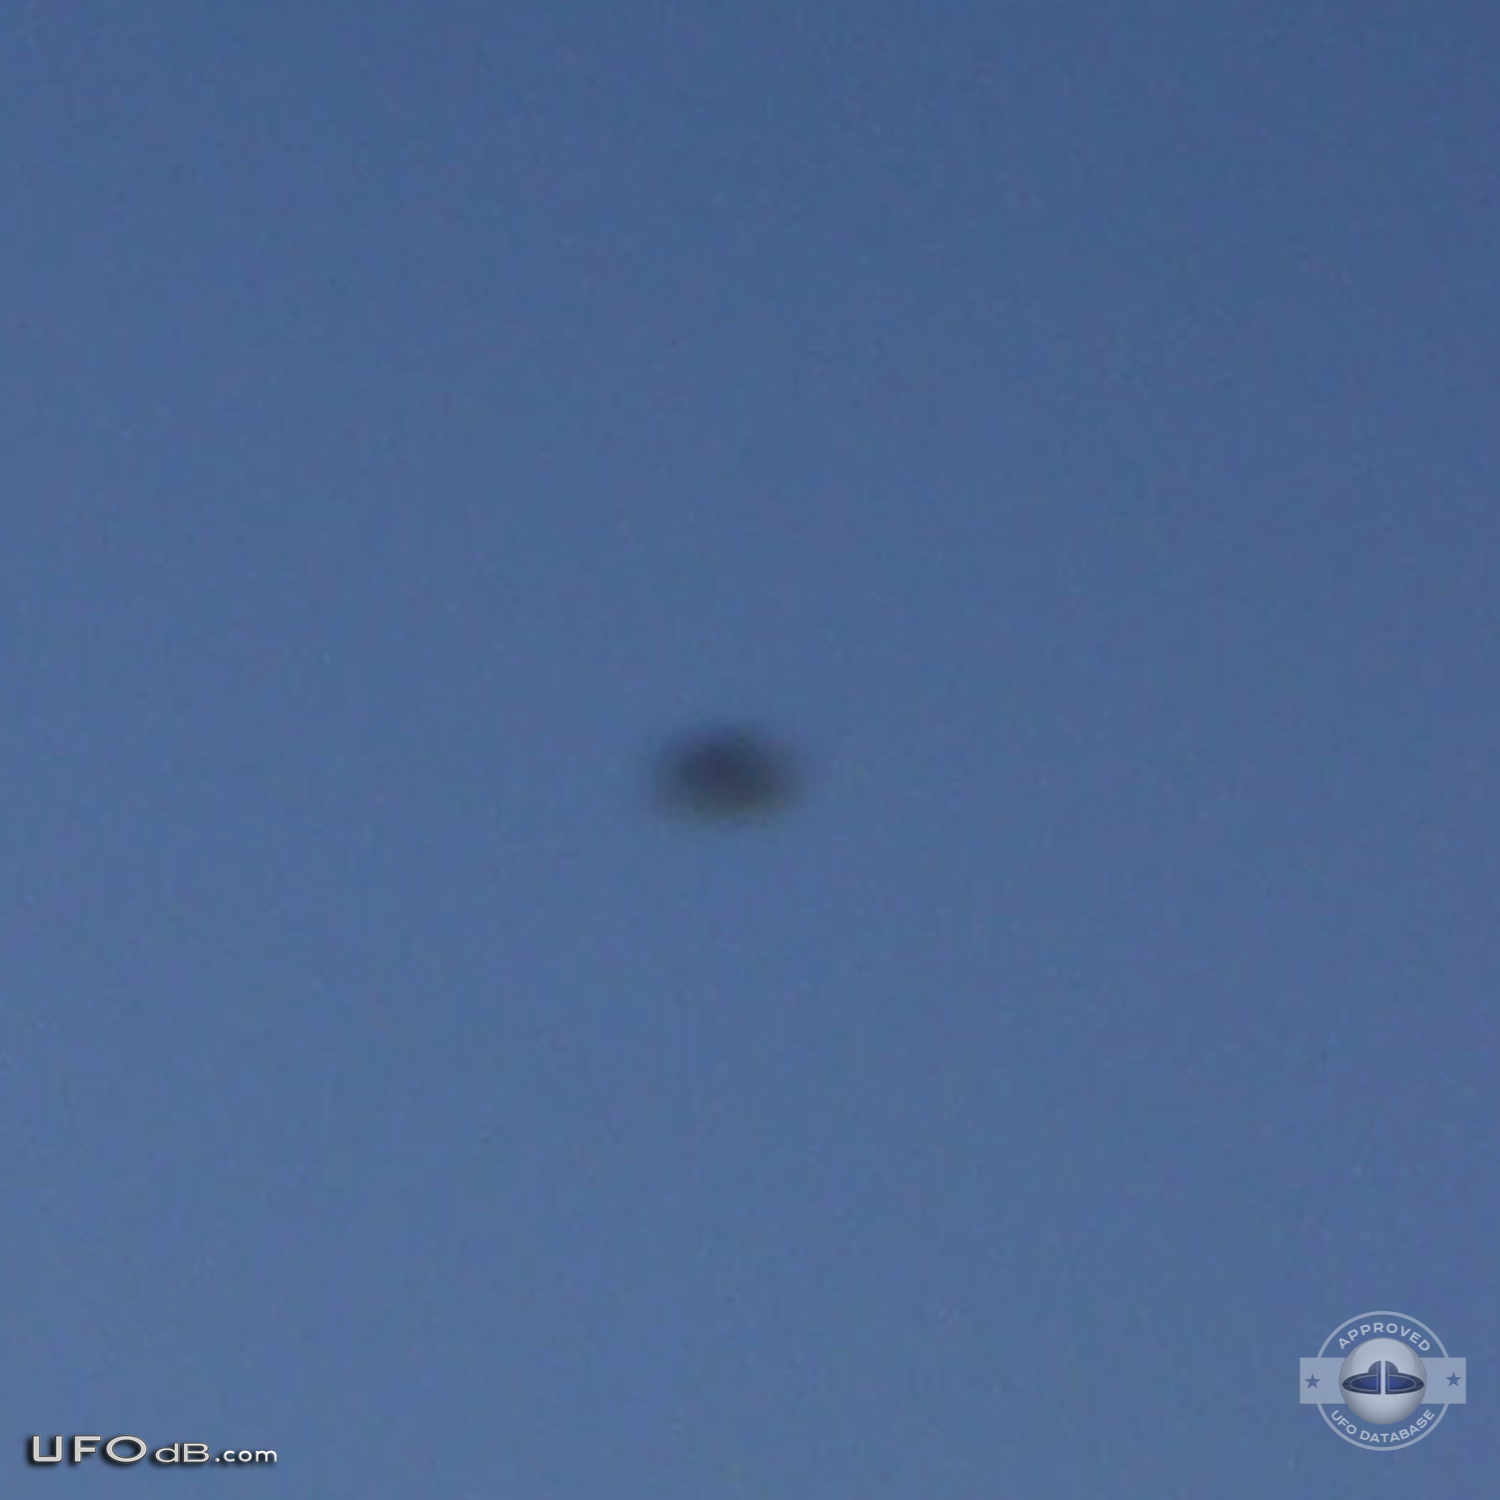 Two ufo pictures taken in the high mountains - Puerto Rico - July 2011 UFO Picture #376-3